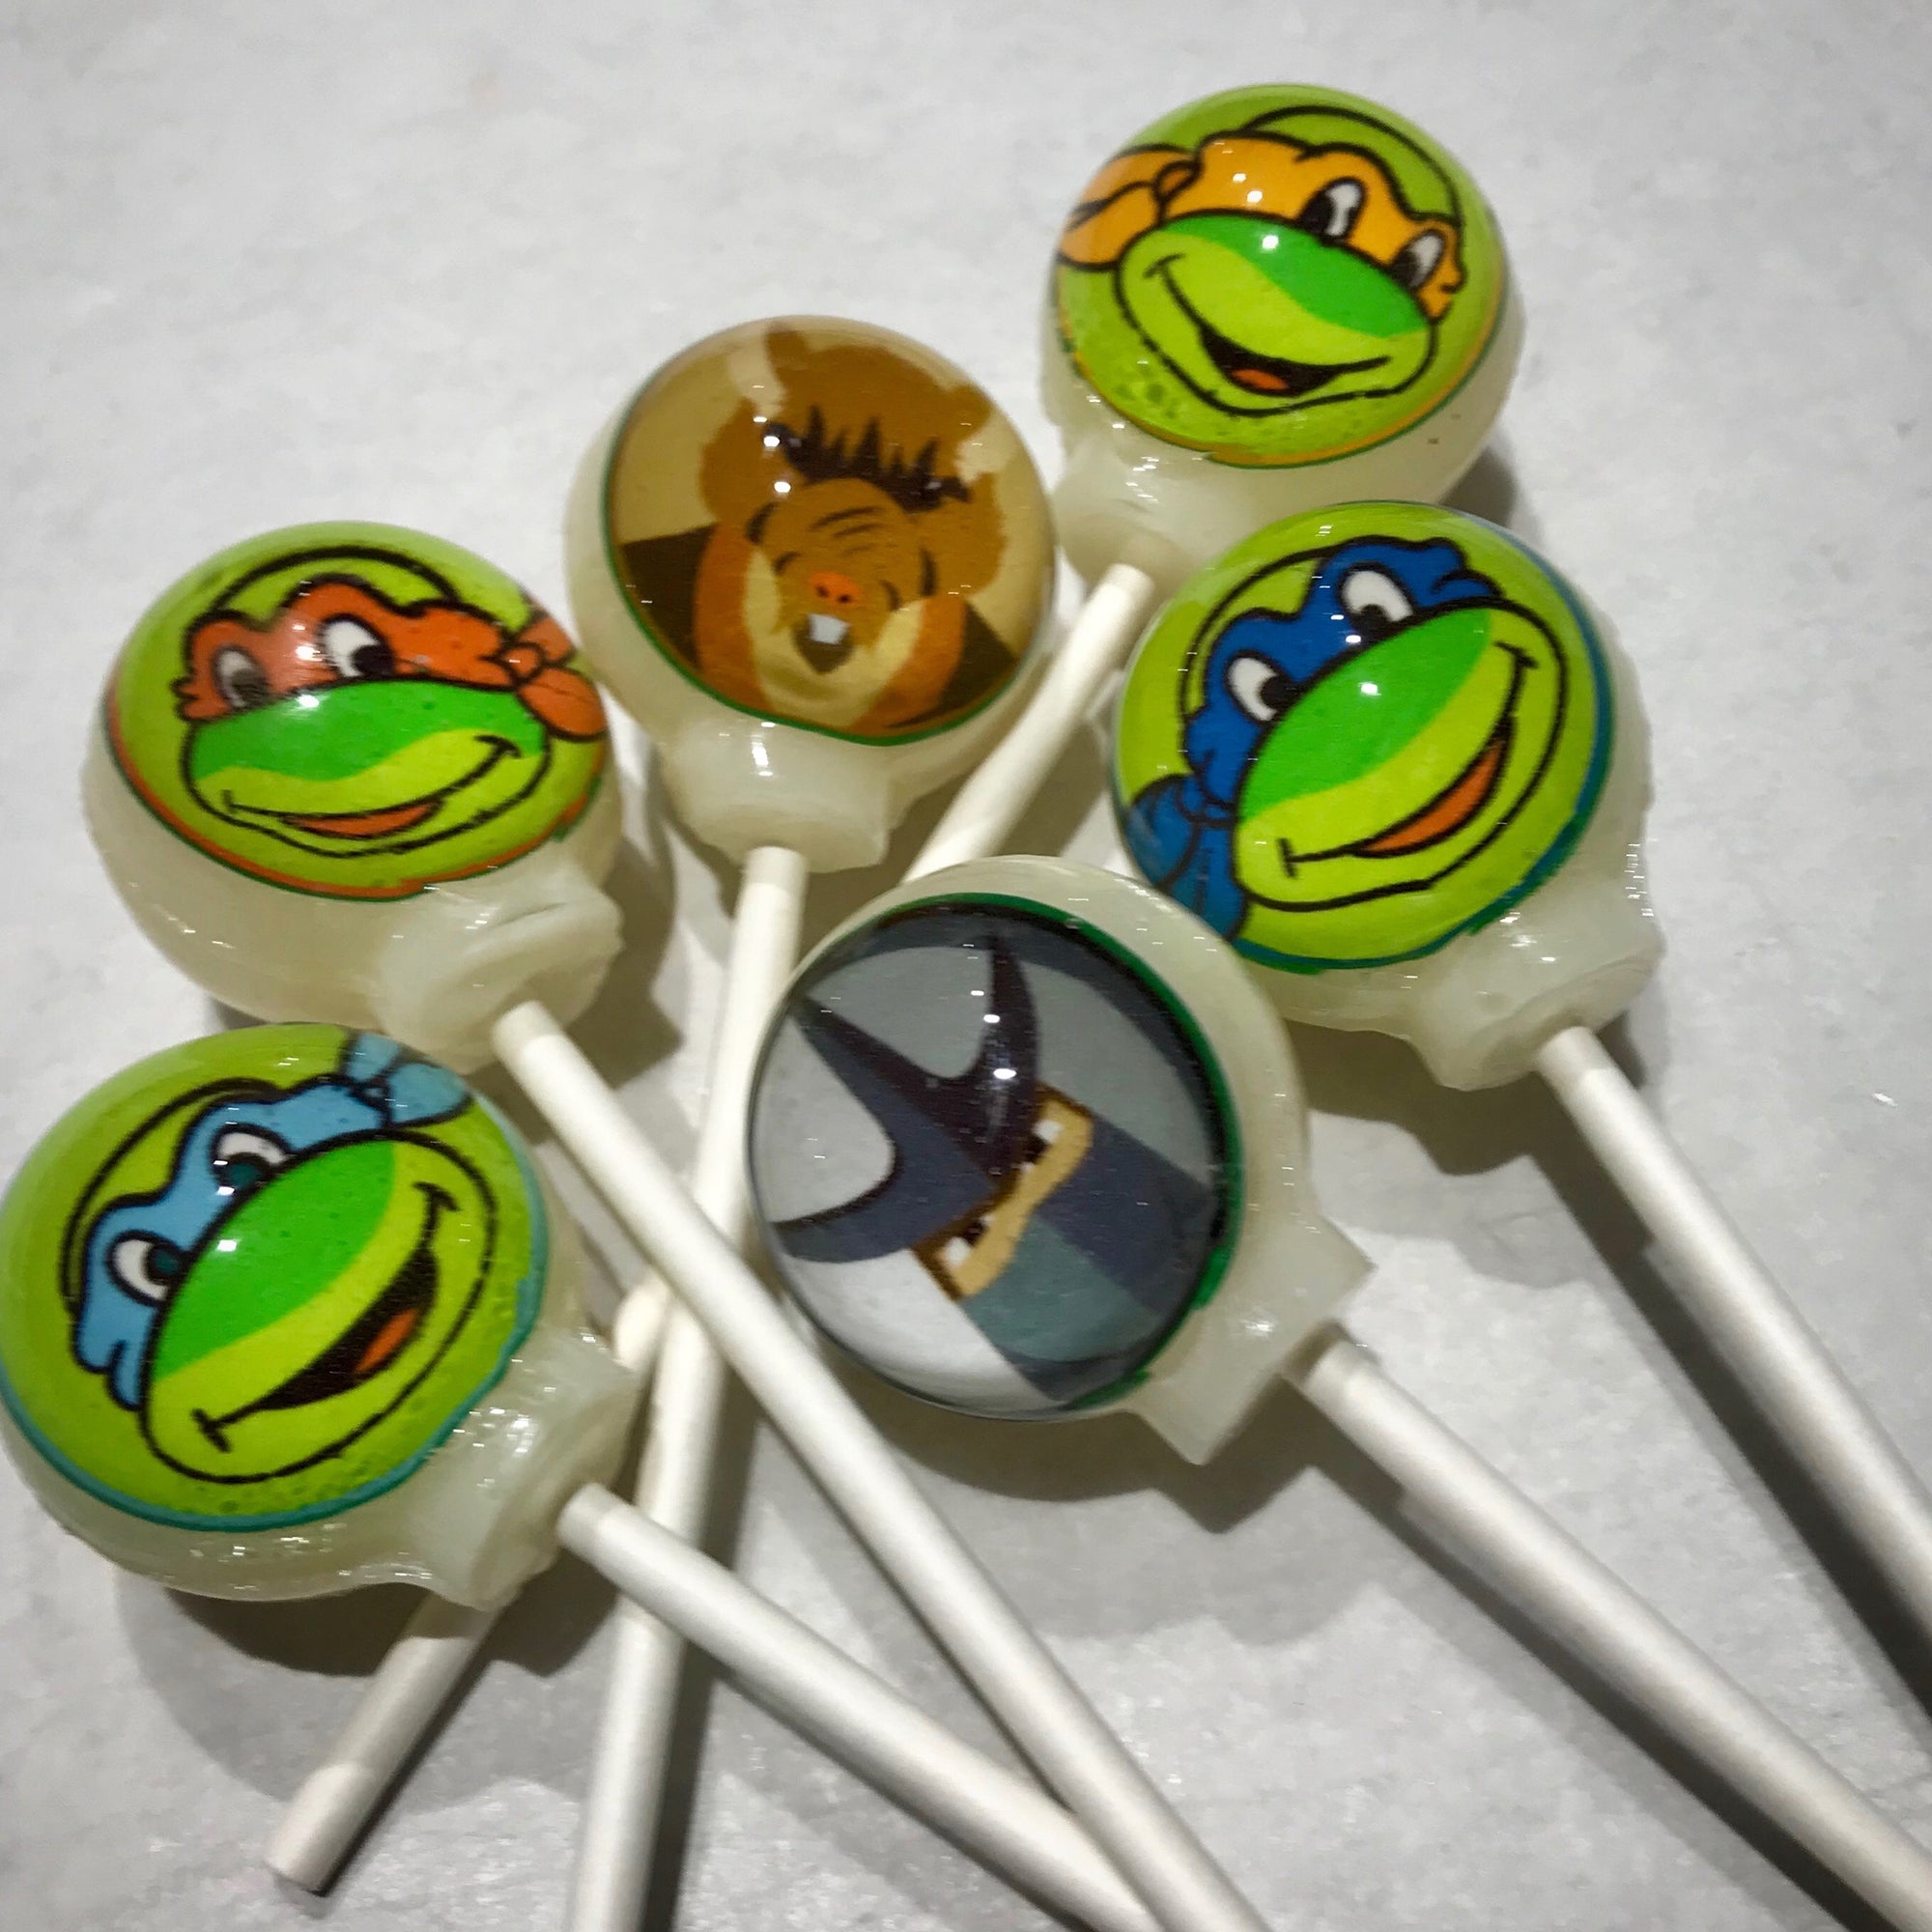 Turtle Power Lollipops 6-piece set by I Want Candy!